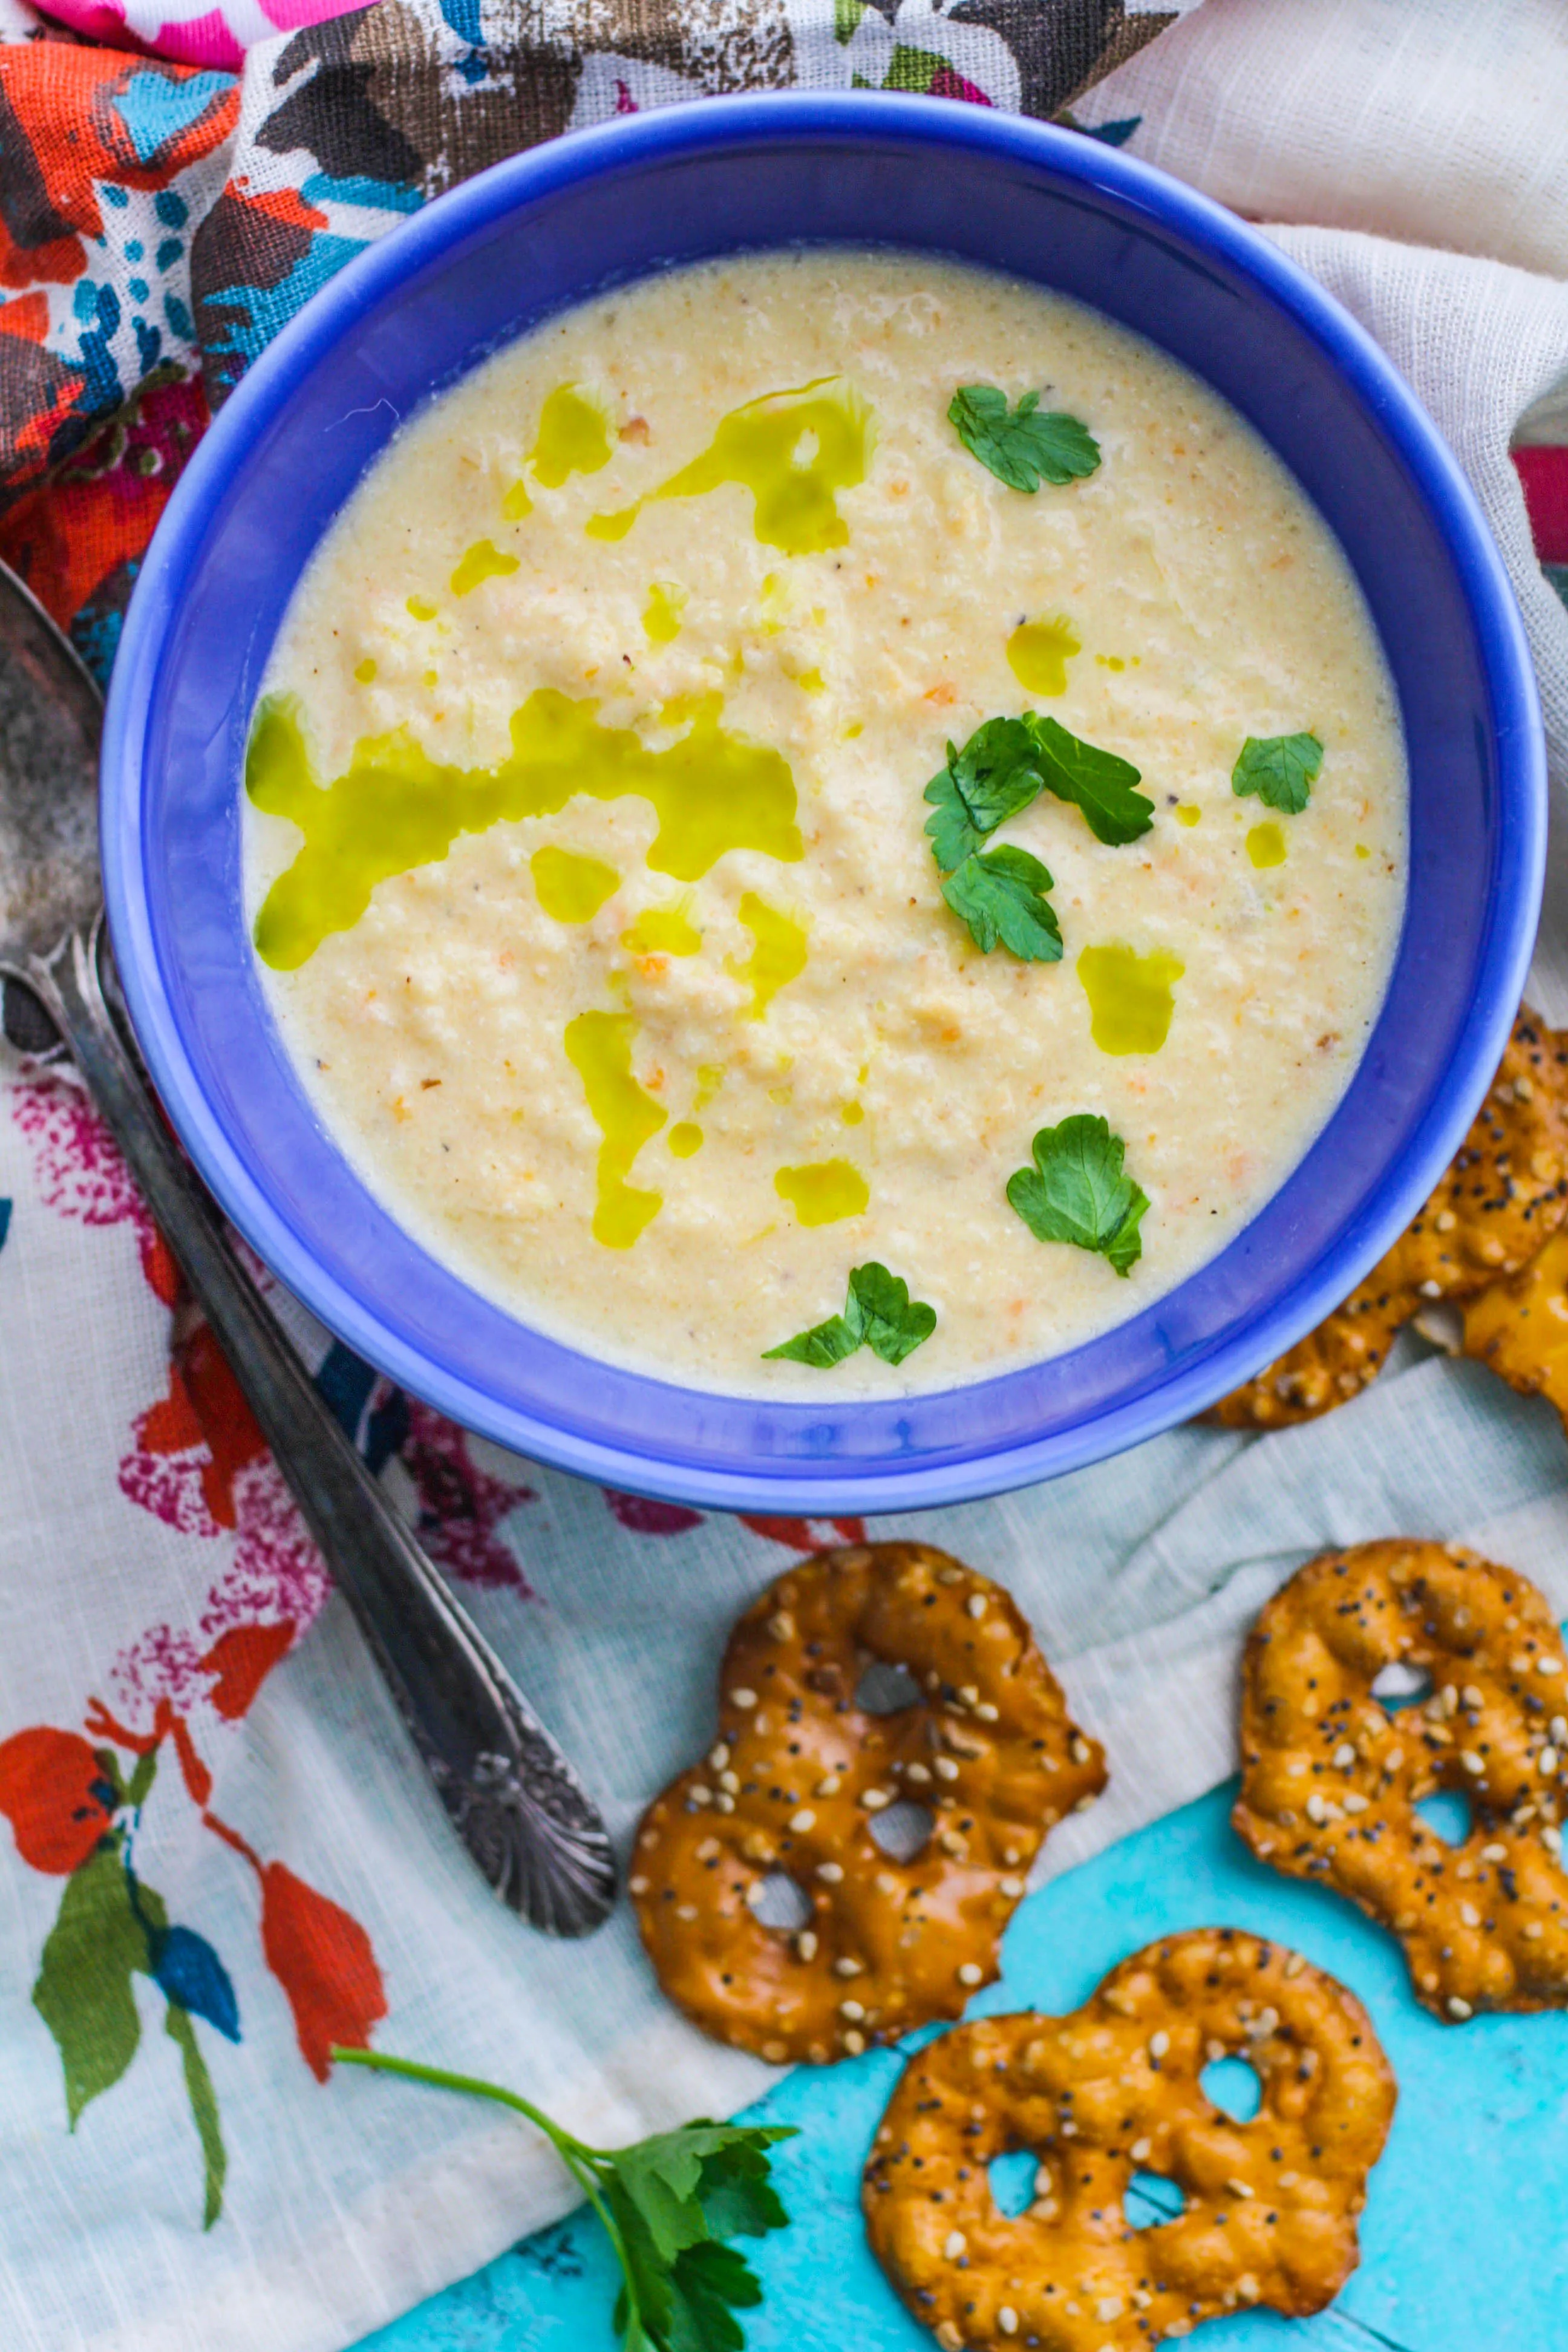 Creamy Roasted Cauliflower Soup with Parsley Oil is a delightful dish. Enjoy Creamy Roasted Cauliflower Soup with Parsley Oil for your next meal.